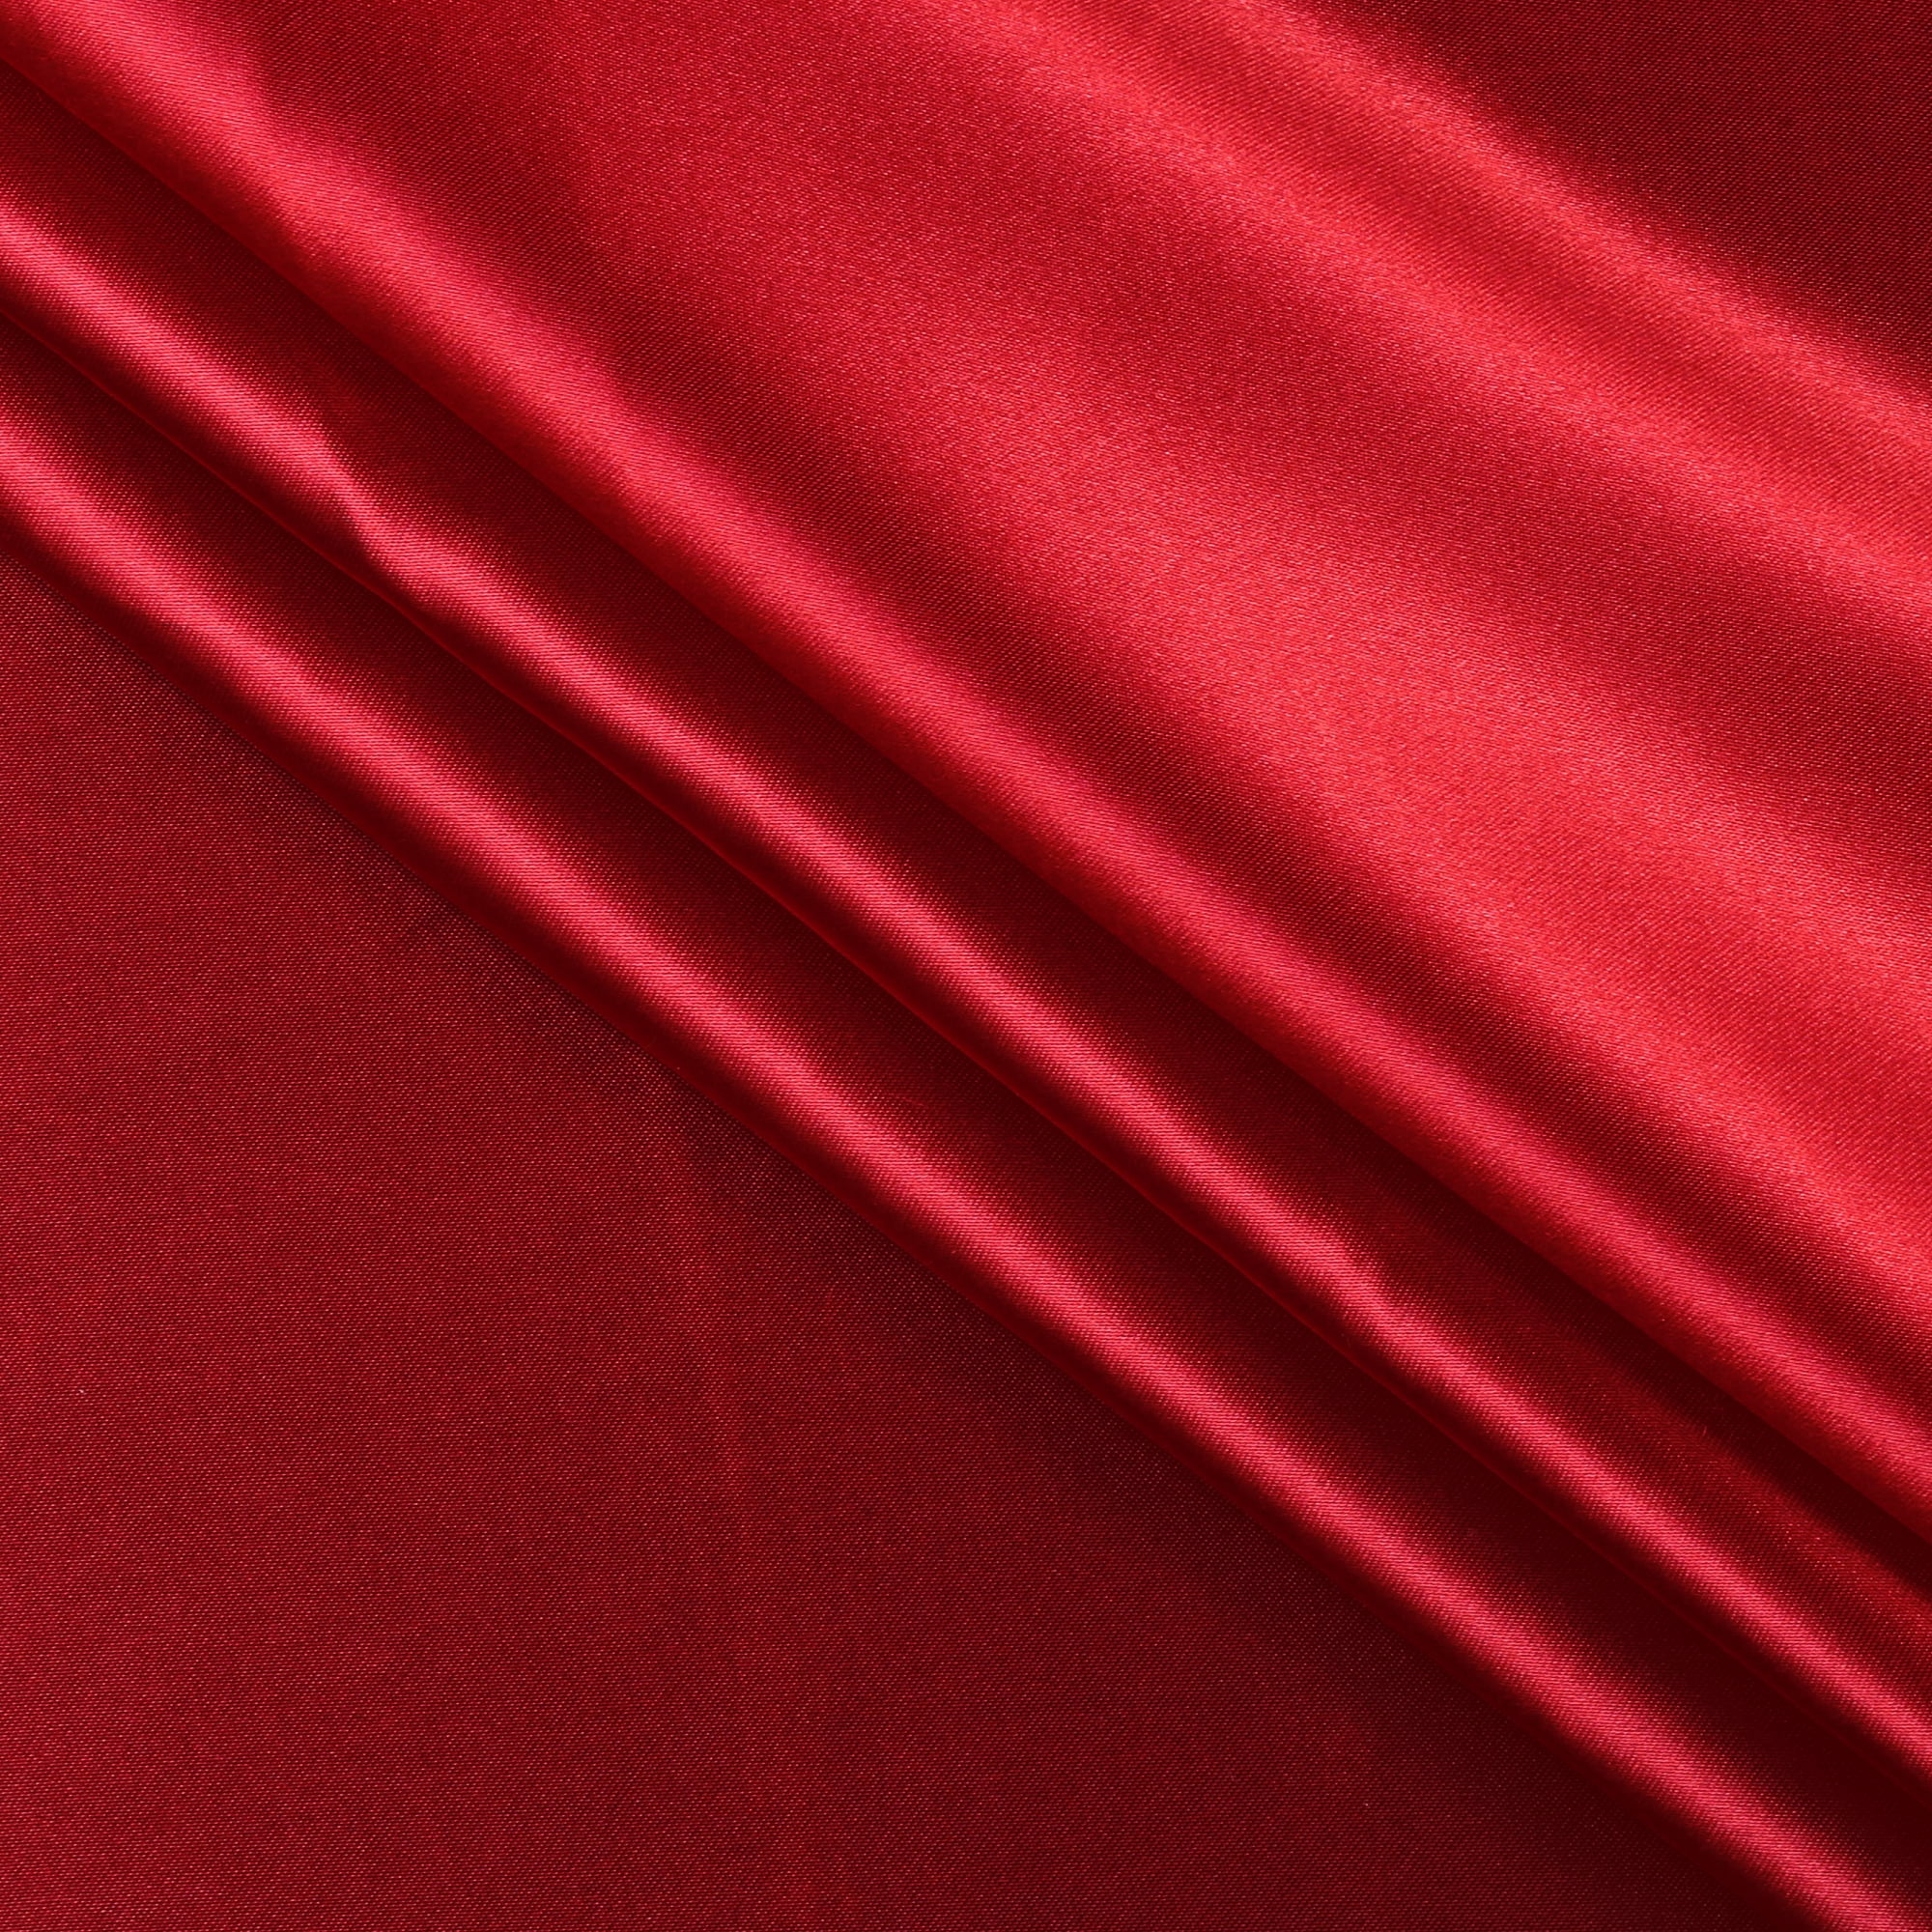 mds Pack of 5 Yard Charmeuse Bridal Solid Satin Fabric for Wedding Dress Fashion Crafts Costumes Decorations Silky Satin 44” Apple Red